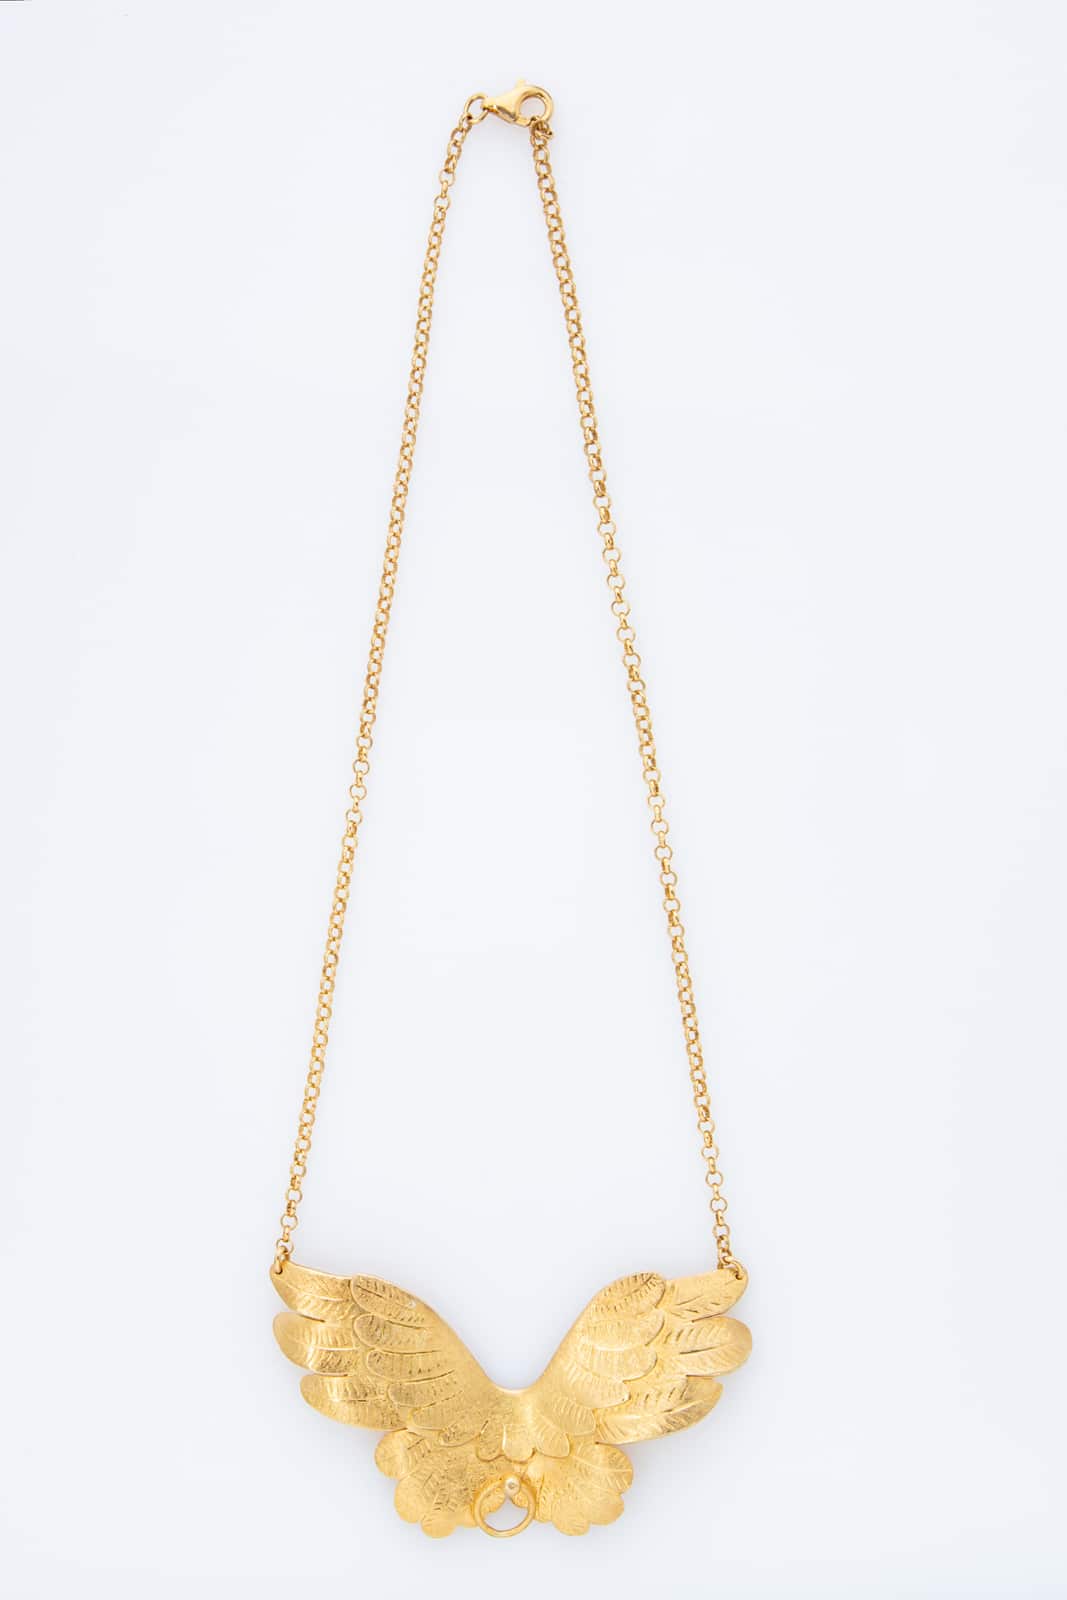 FLY ME GOLD NECKLACE